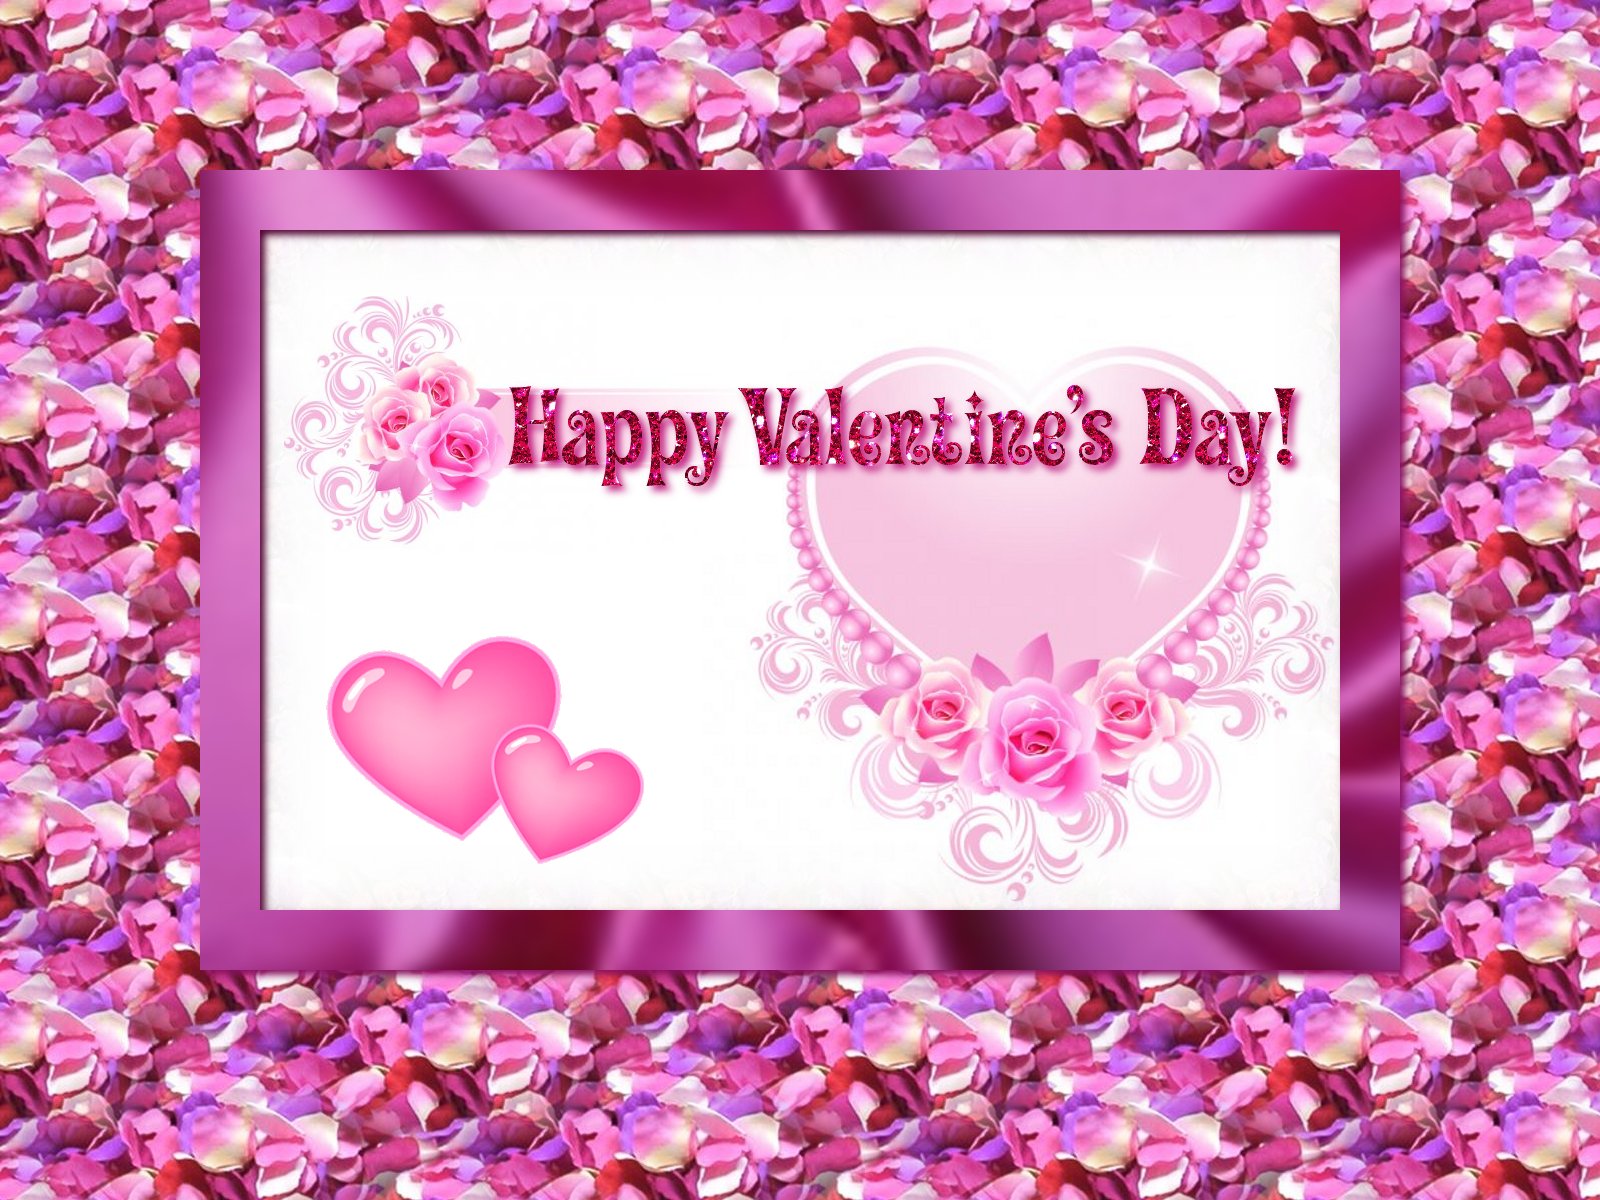 Love Wallpapers: happy valentines day wallpaper1600 x 1200